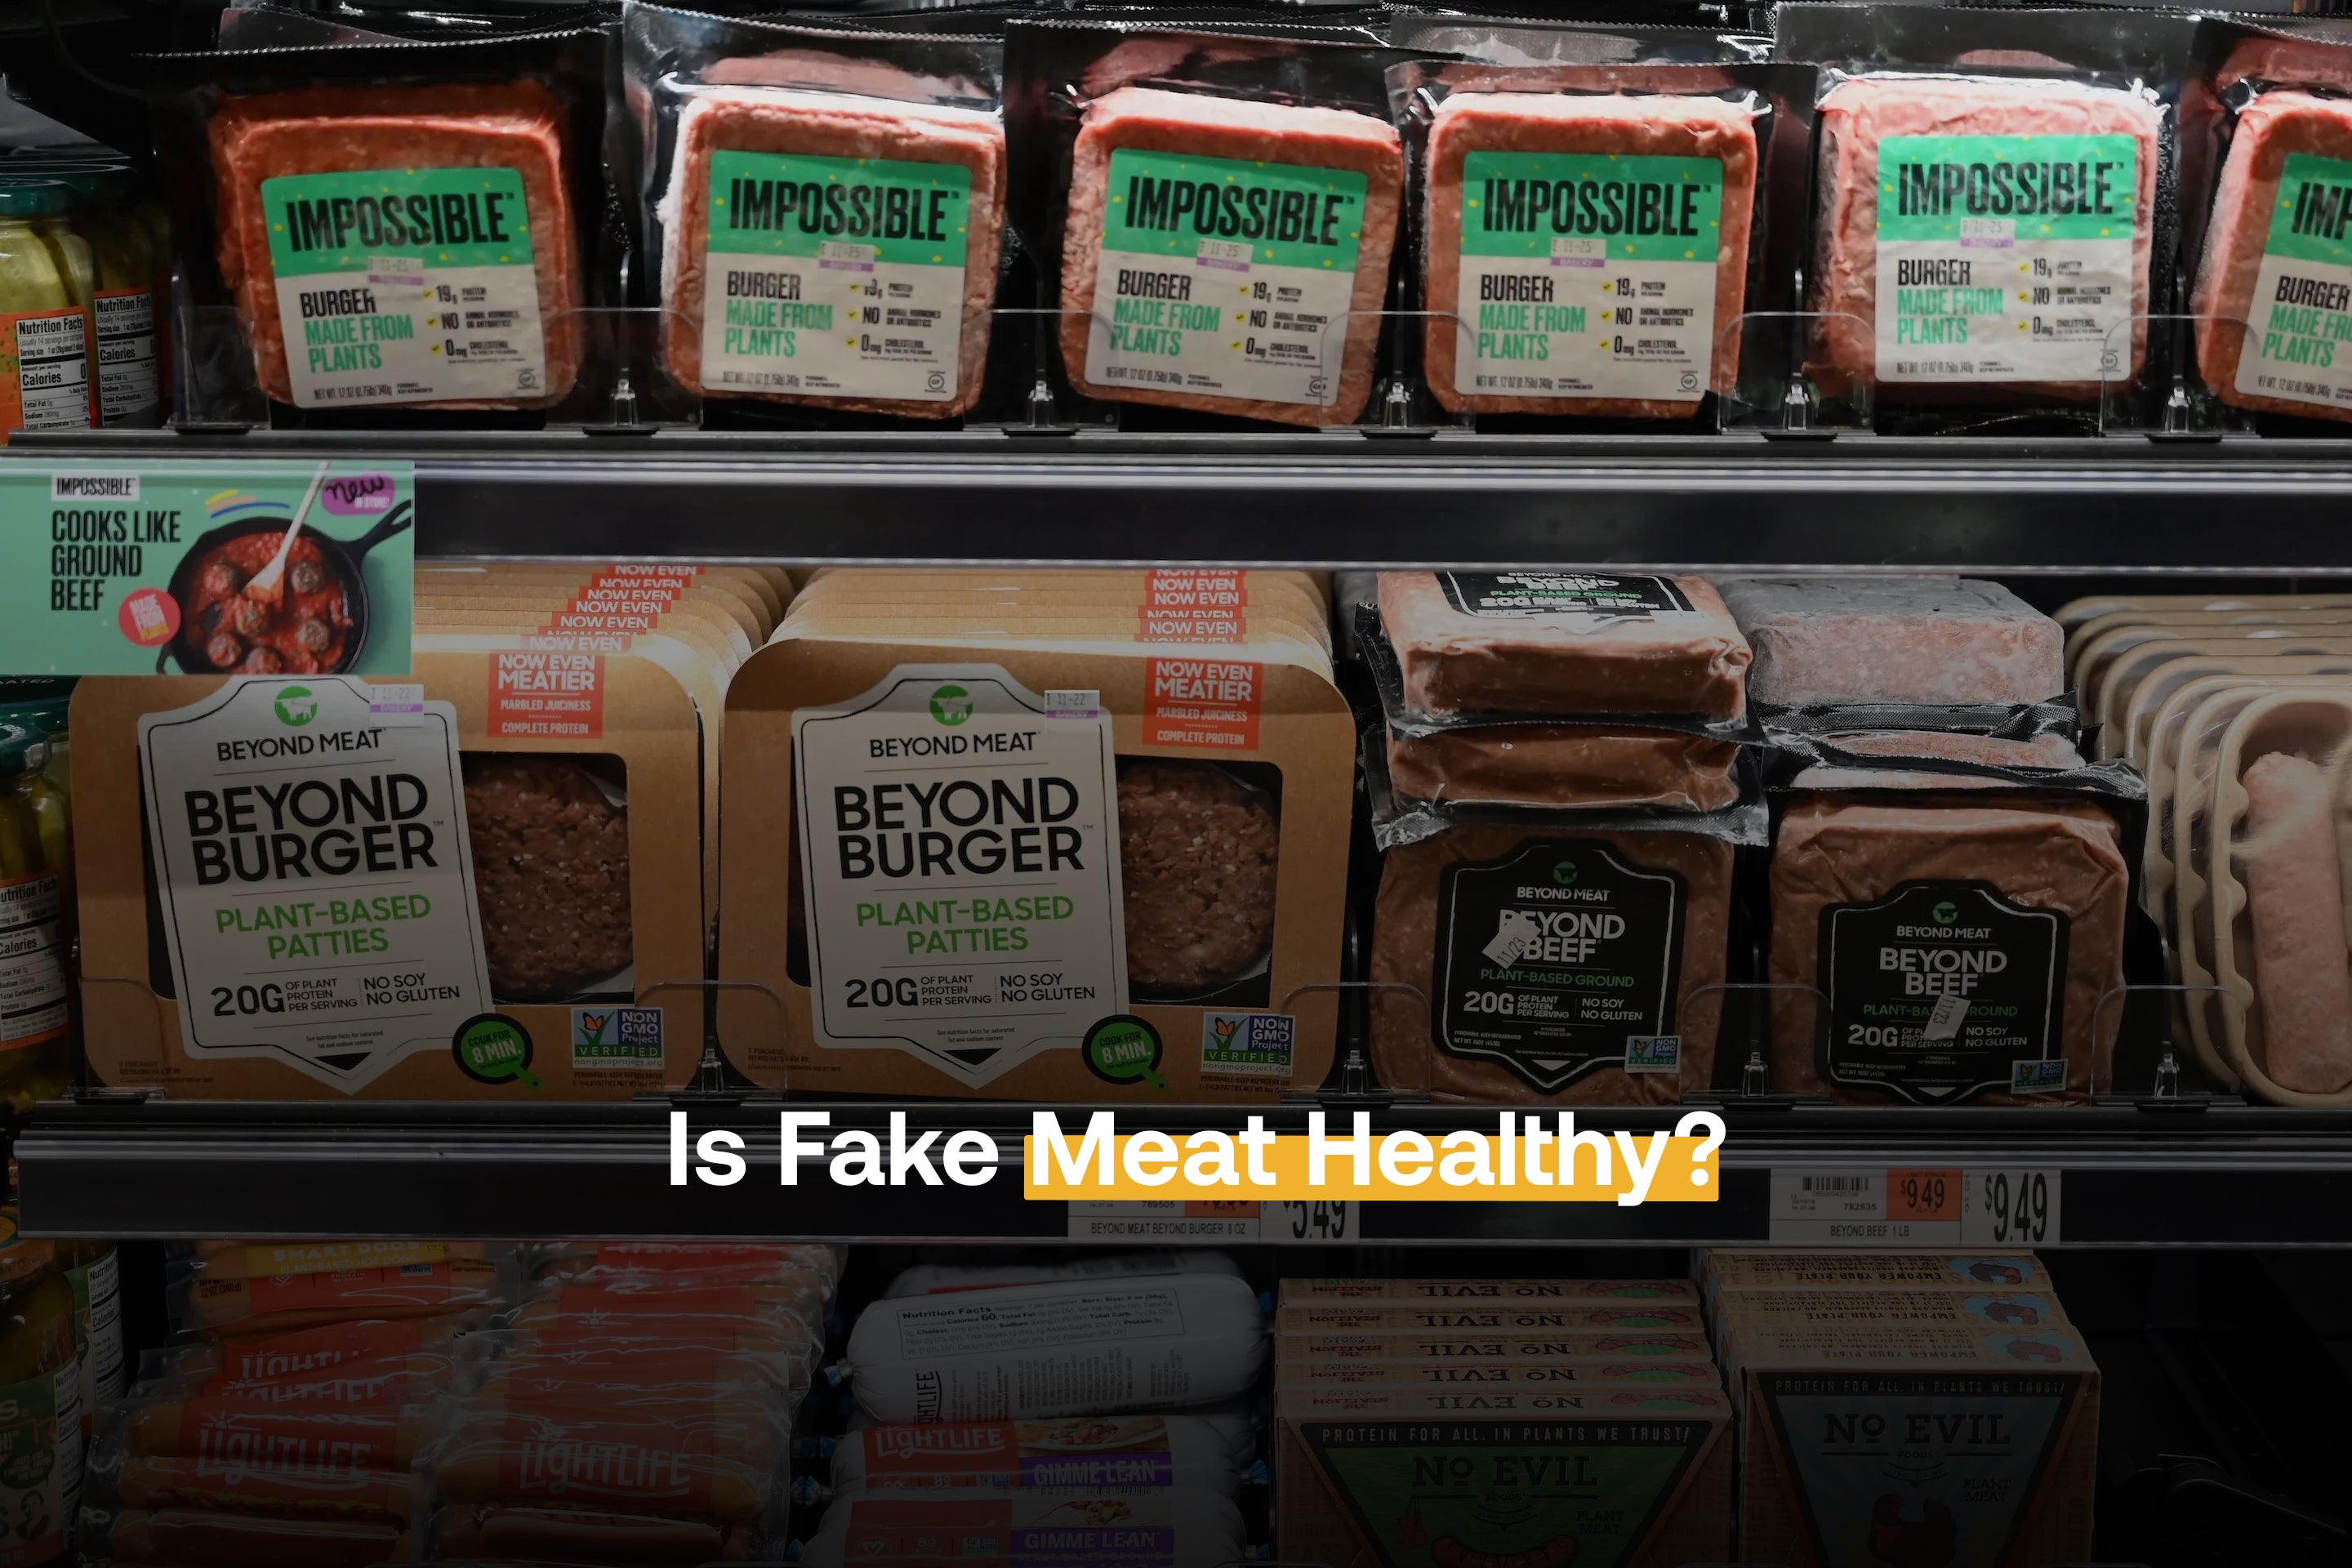 Real and fake meat share problems